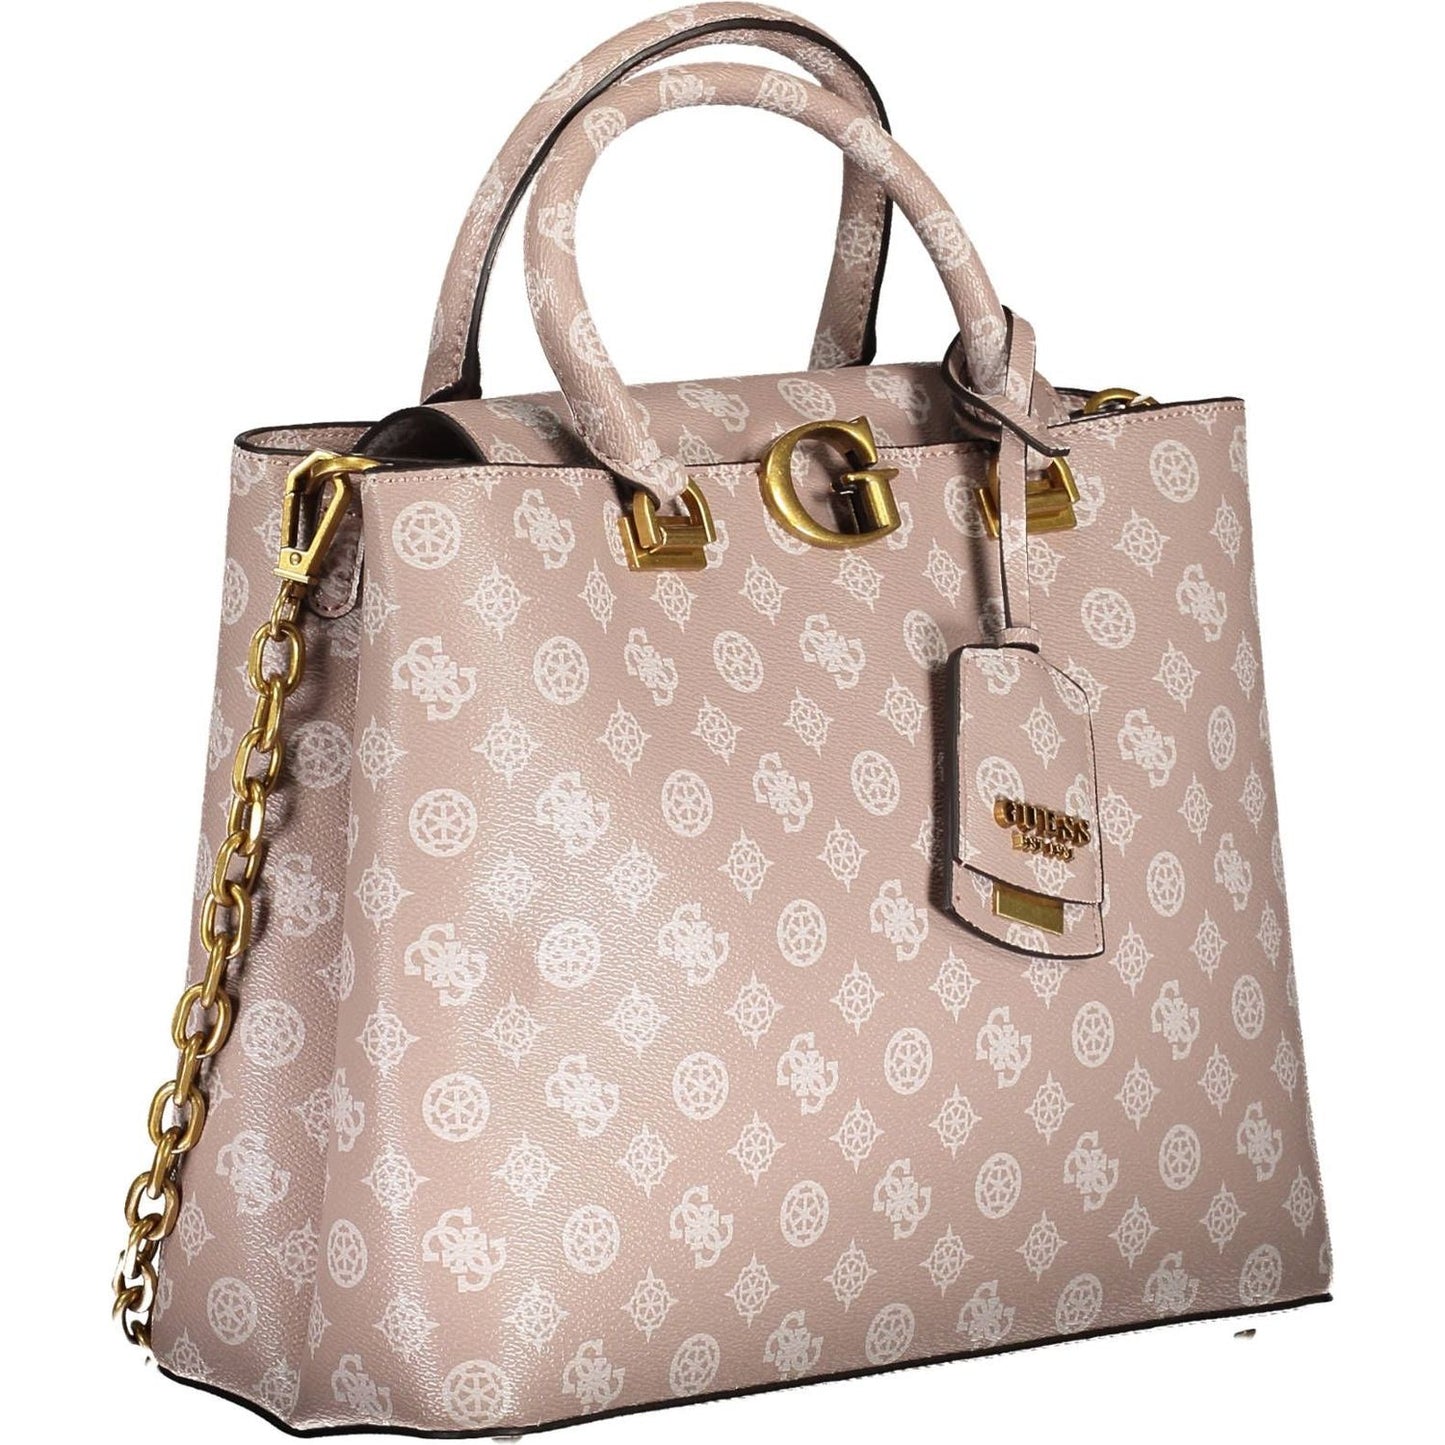 Guess Jeans | Chic Pink Two-Handle Guess Handbag with Chain Strap| McRichard Designer Brands   